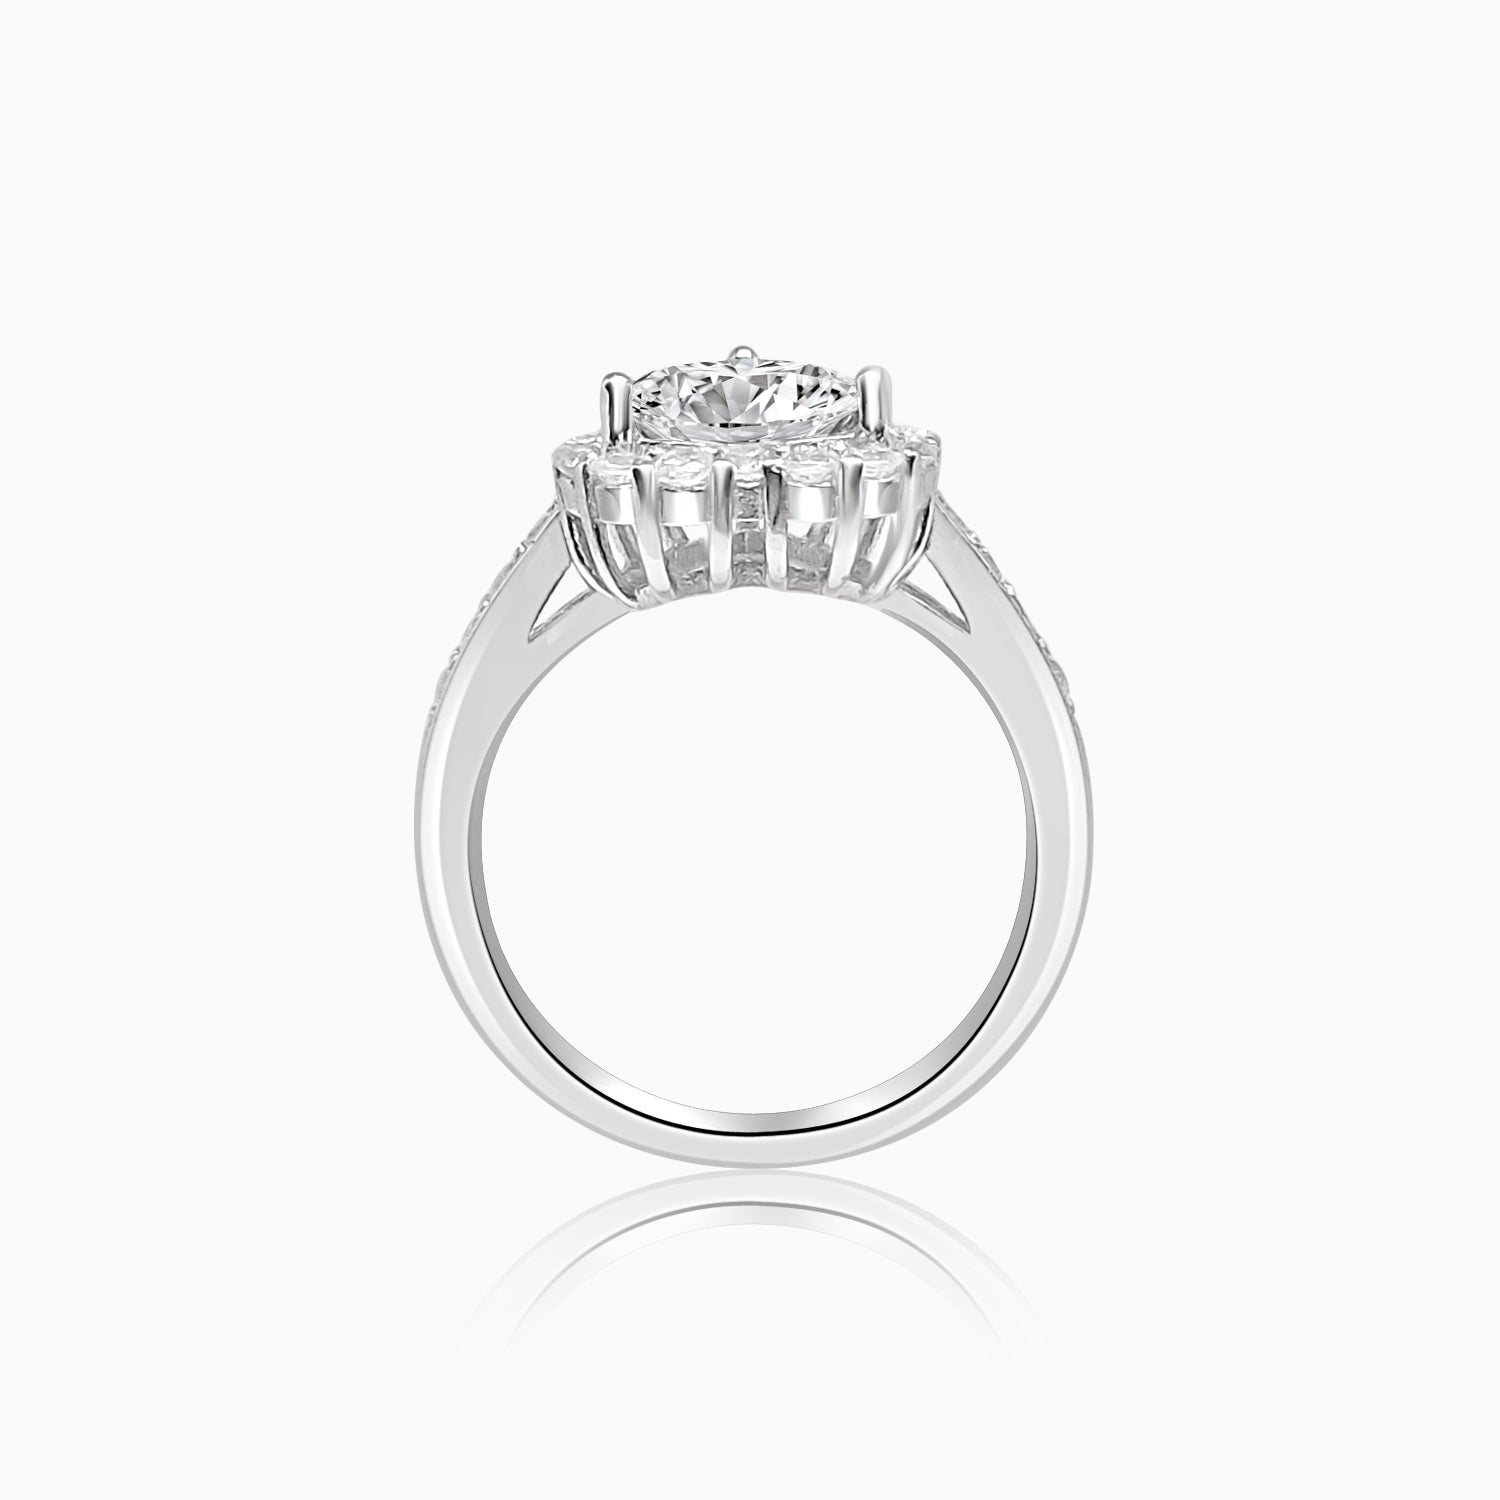 Silver Sparkling Grandoise Heart Solitaire Ring